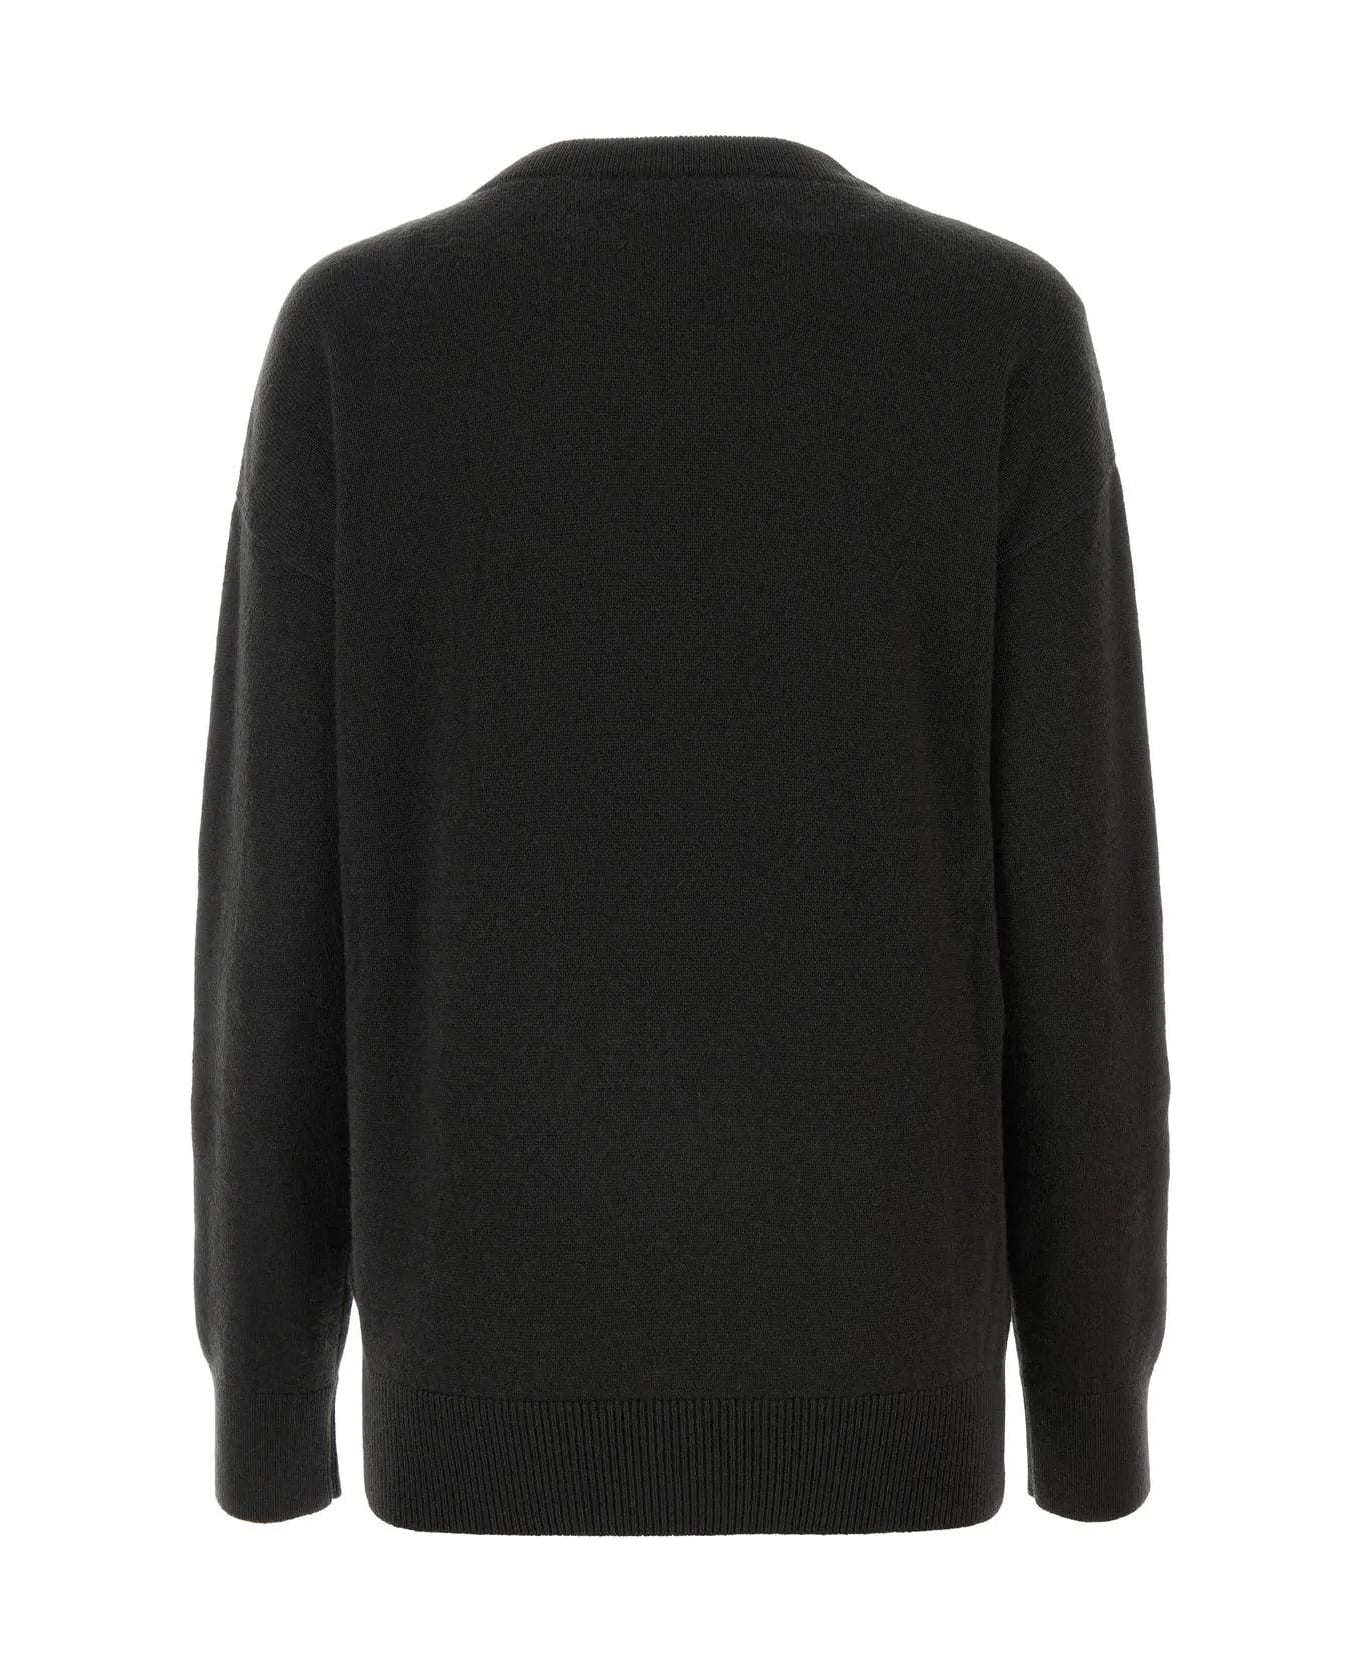 Burberry Anthracite Cashmere Sweater - Onyx ニットウェア